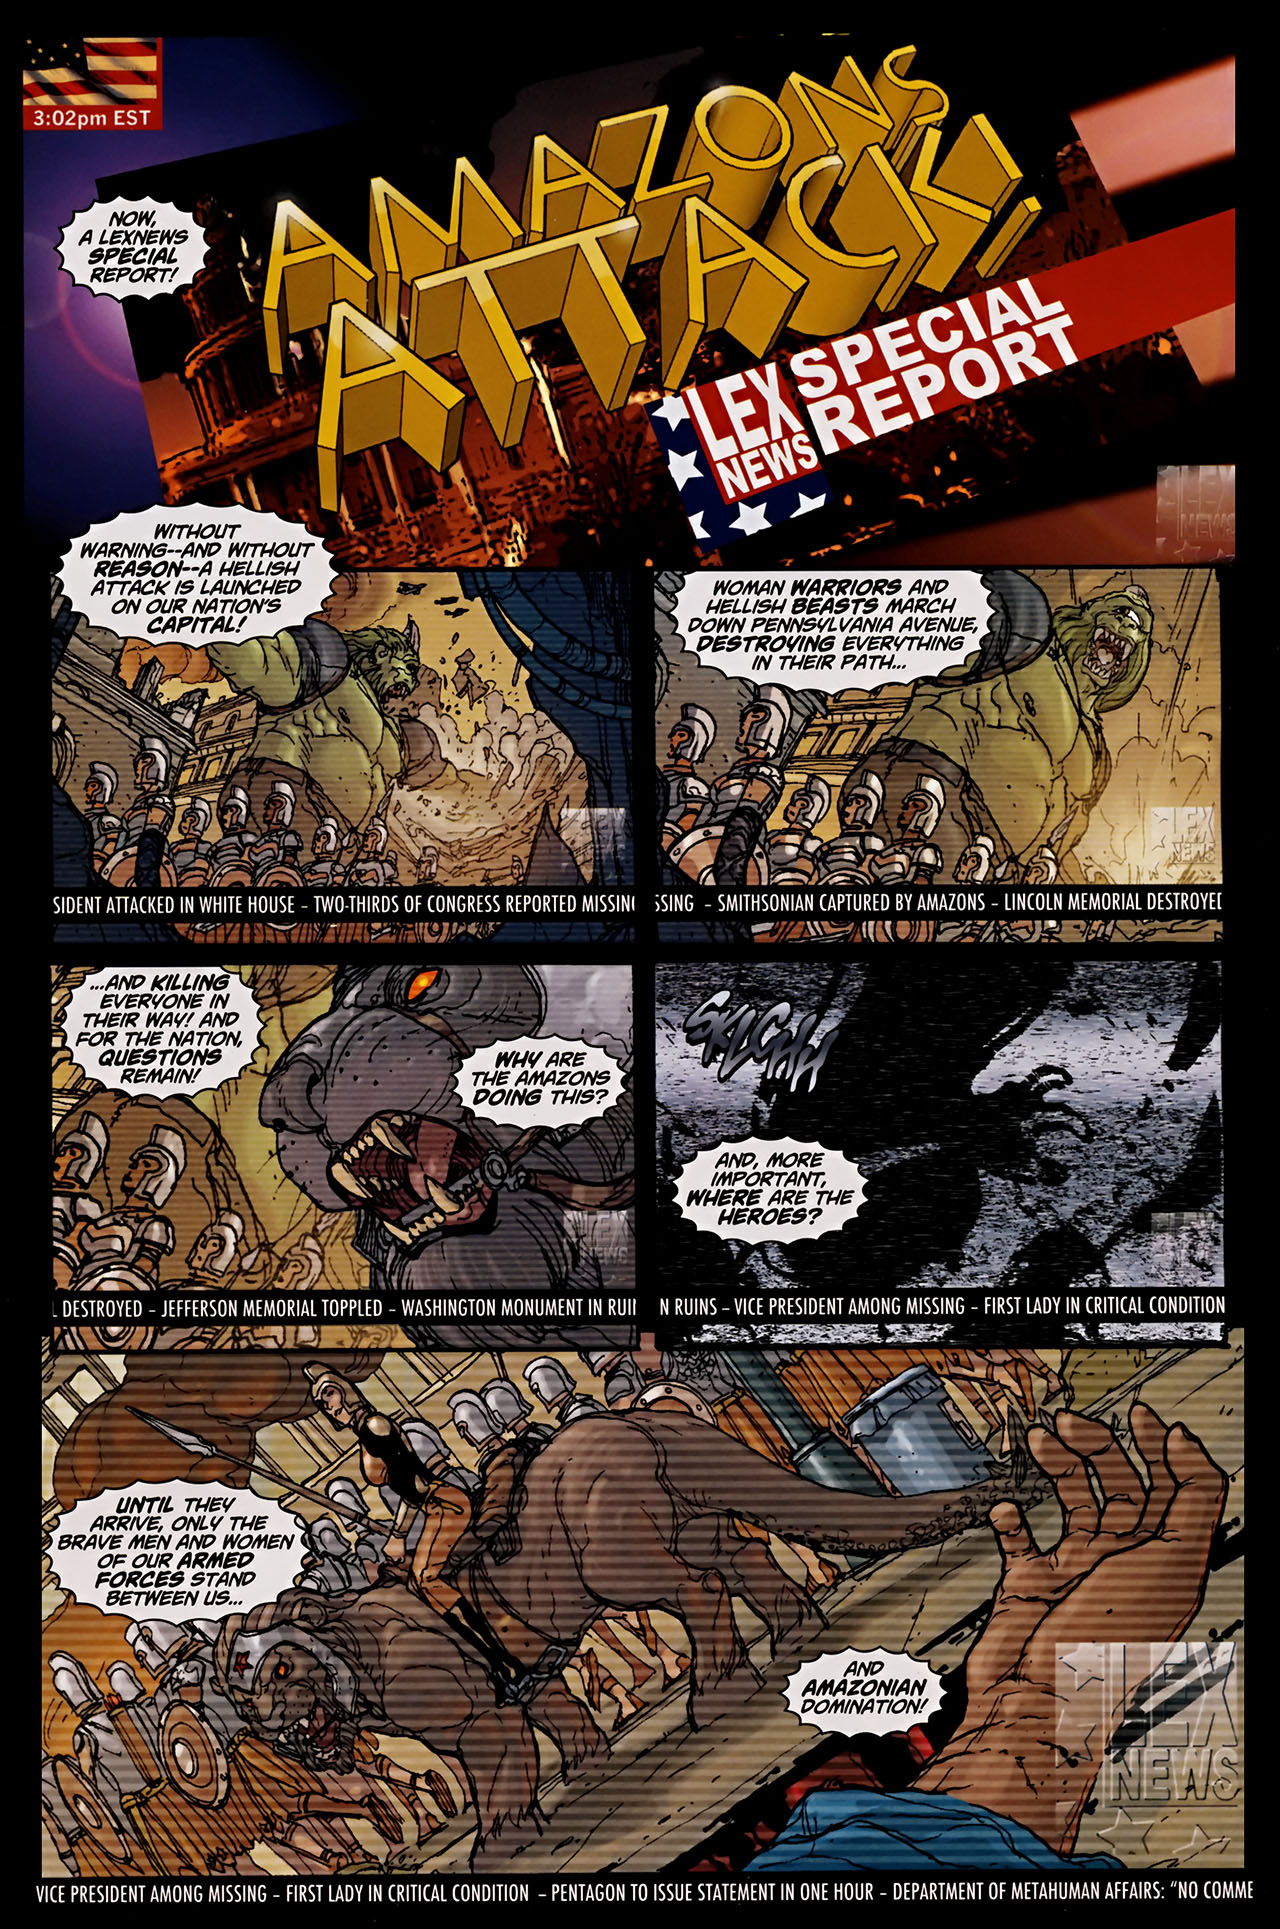 jpg_Amazons_Attack_02_page_02.jpg